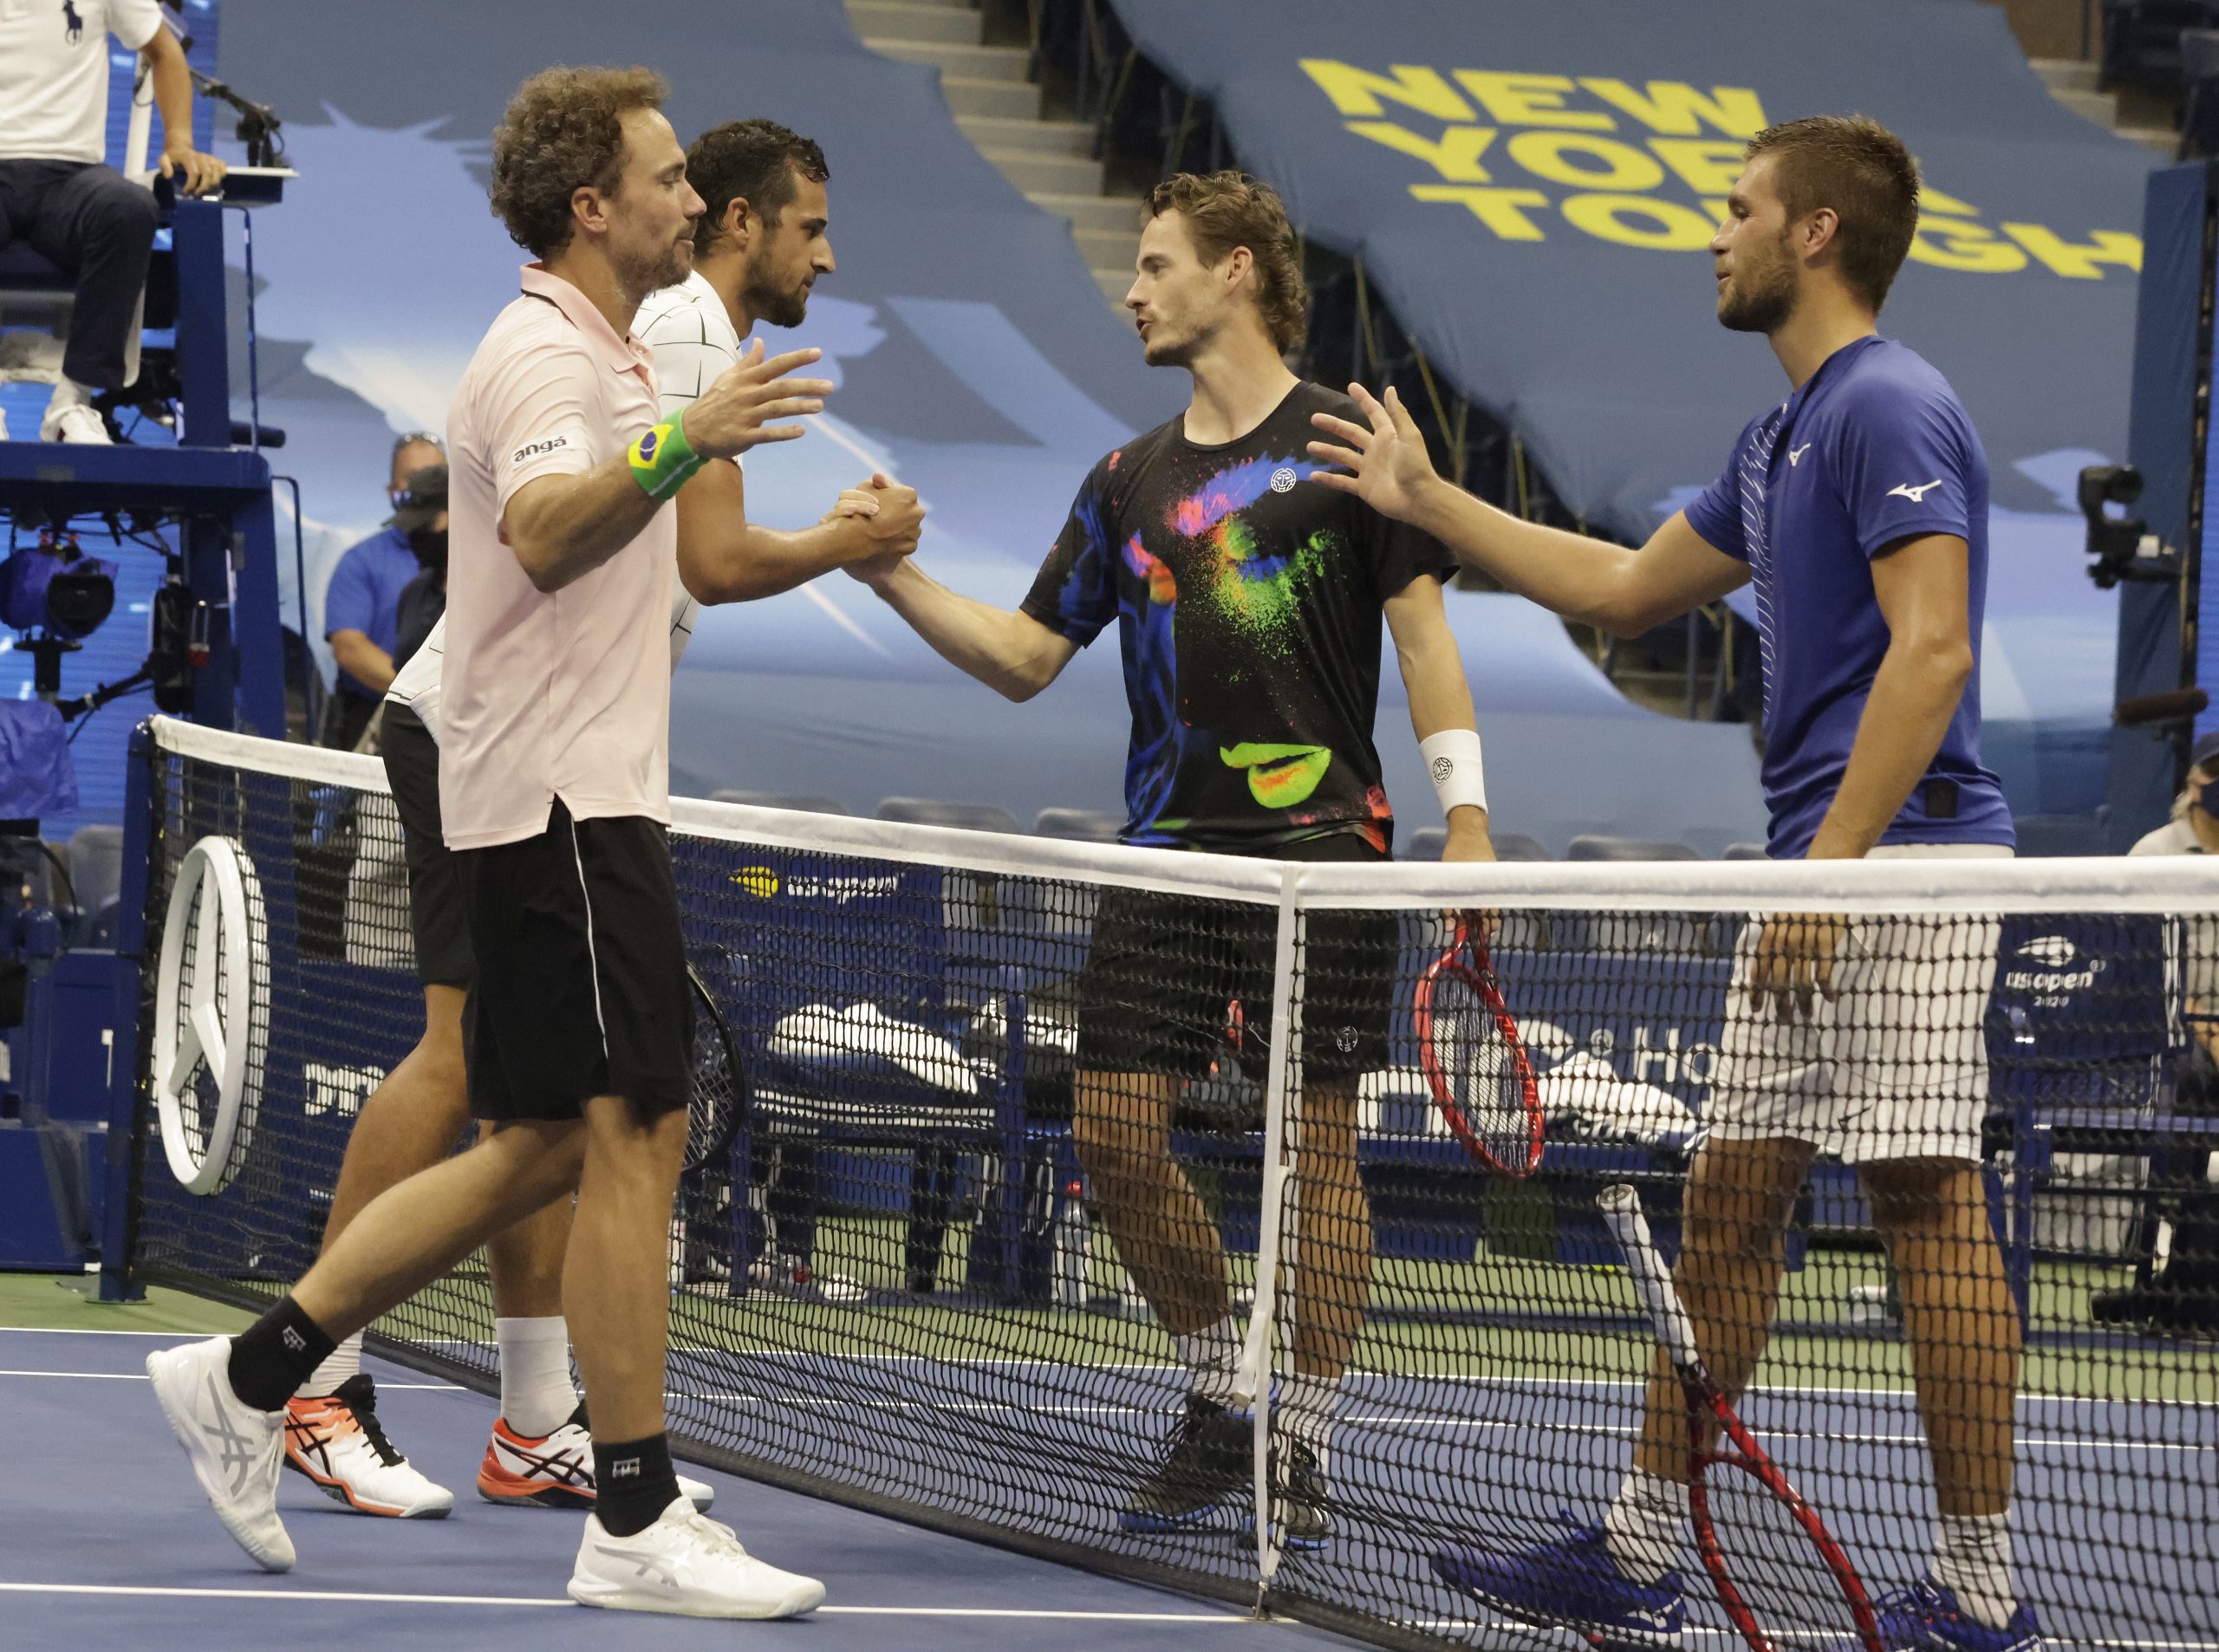 epa08660034 Wesley Koolhof of the Netherlands (2R) and Nikola Mektic of Croatia (R) at the net with Mate Pavic of Croatia (2L) and Bruno Soares of Brazil (L) after the men's doubles final match on the eleventh day of the US Open Tennis Championships the USTA National Tennis Center in Flushing Meadows, New York, USA, 10 September 2020. Due to the coronavirus pandemic, the US Open is being played without fans and runs from 31 August through 13 September.  EPA/JASON SZENES